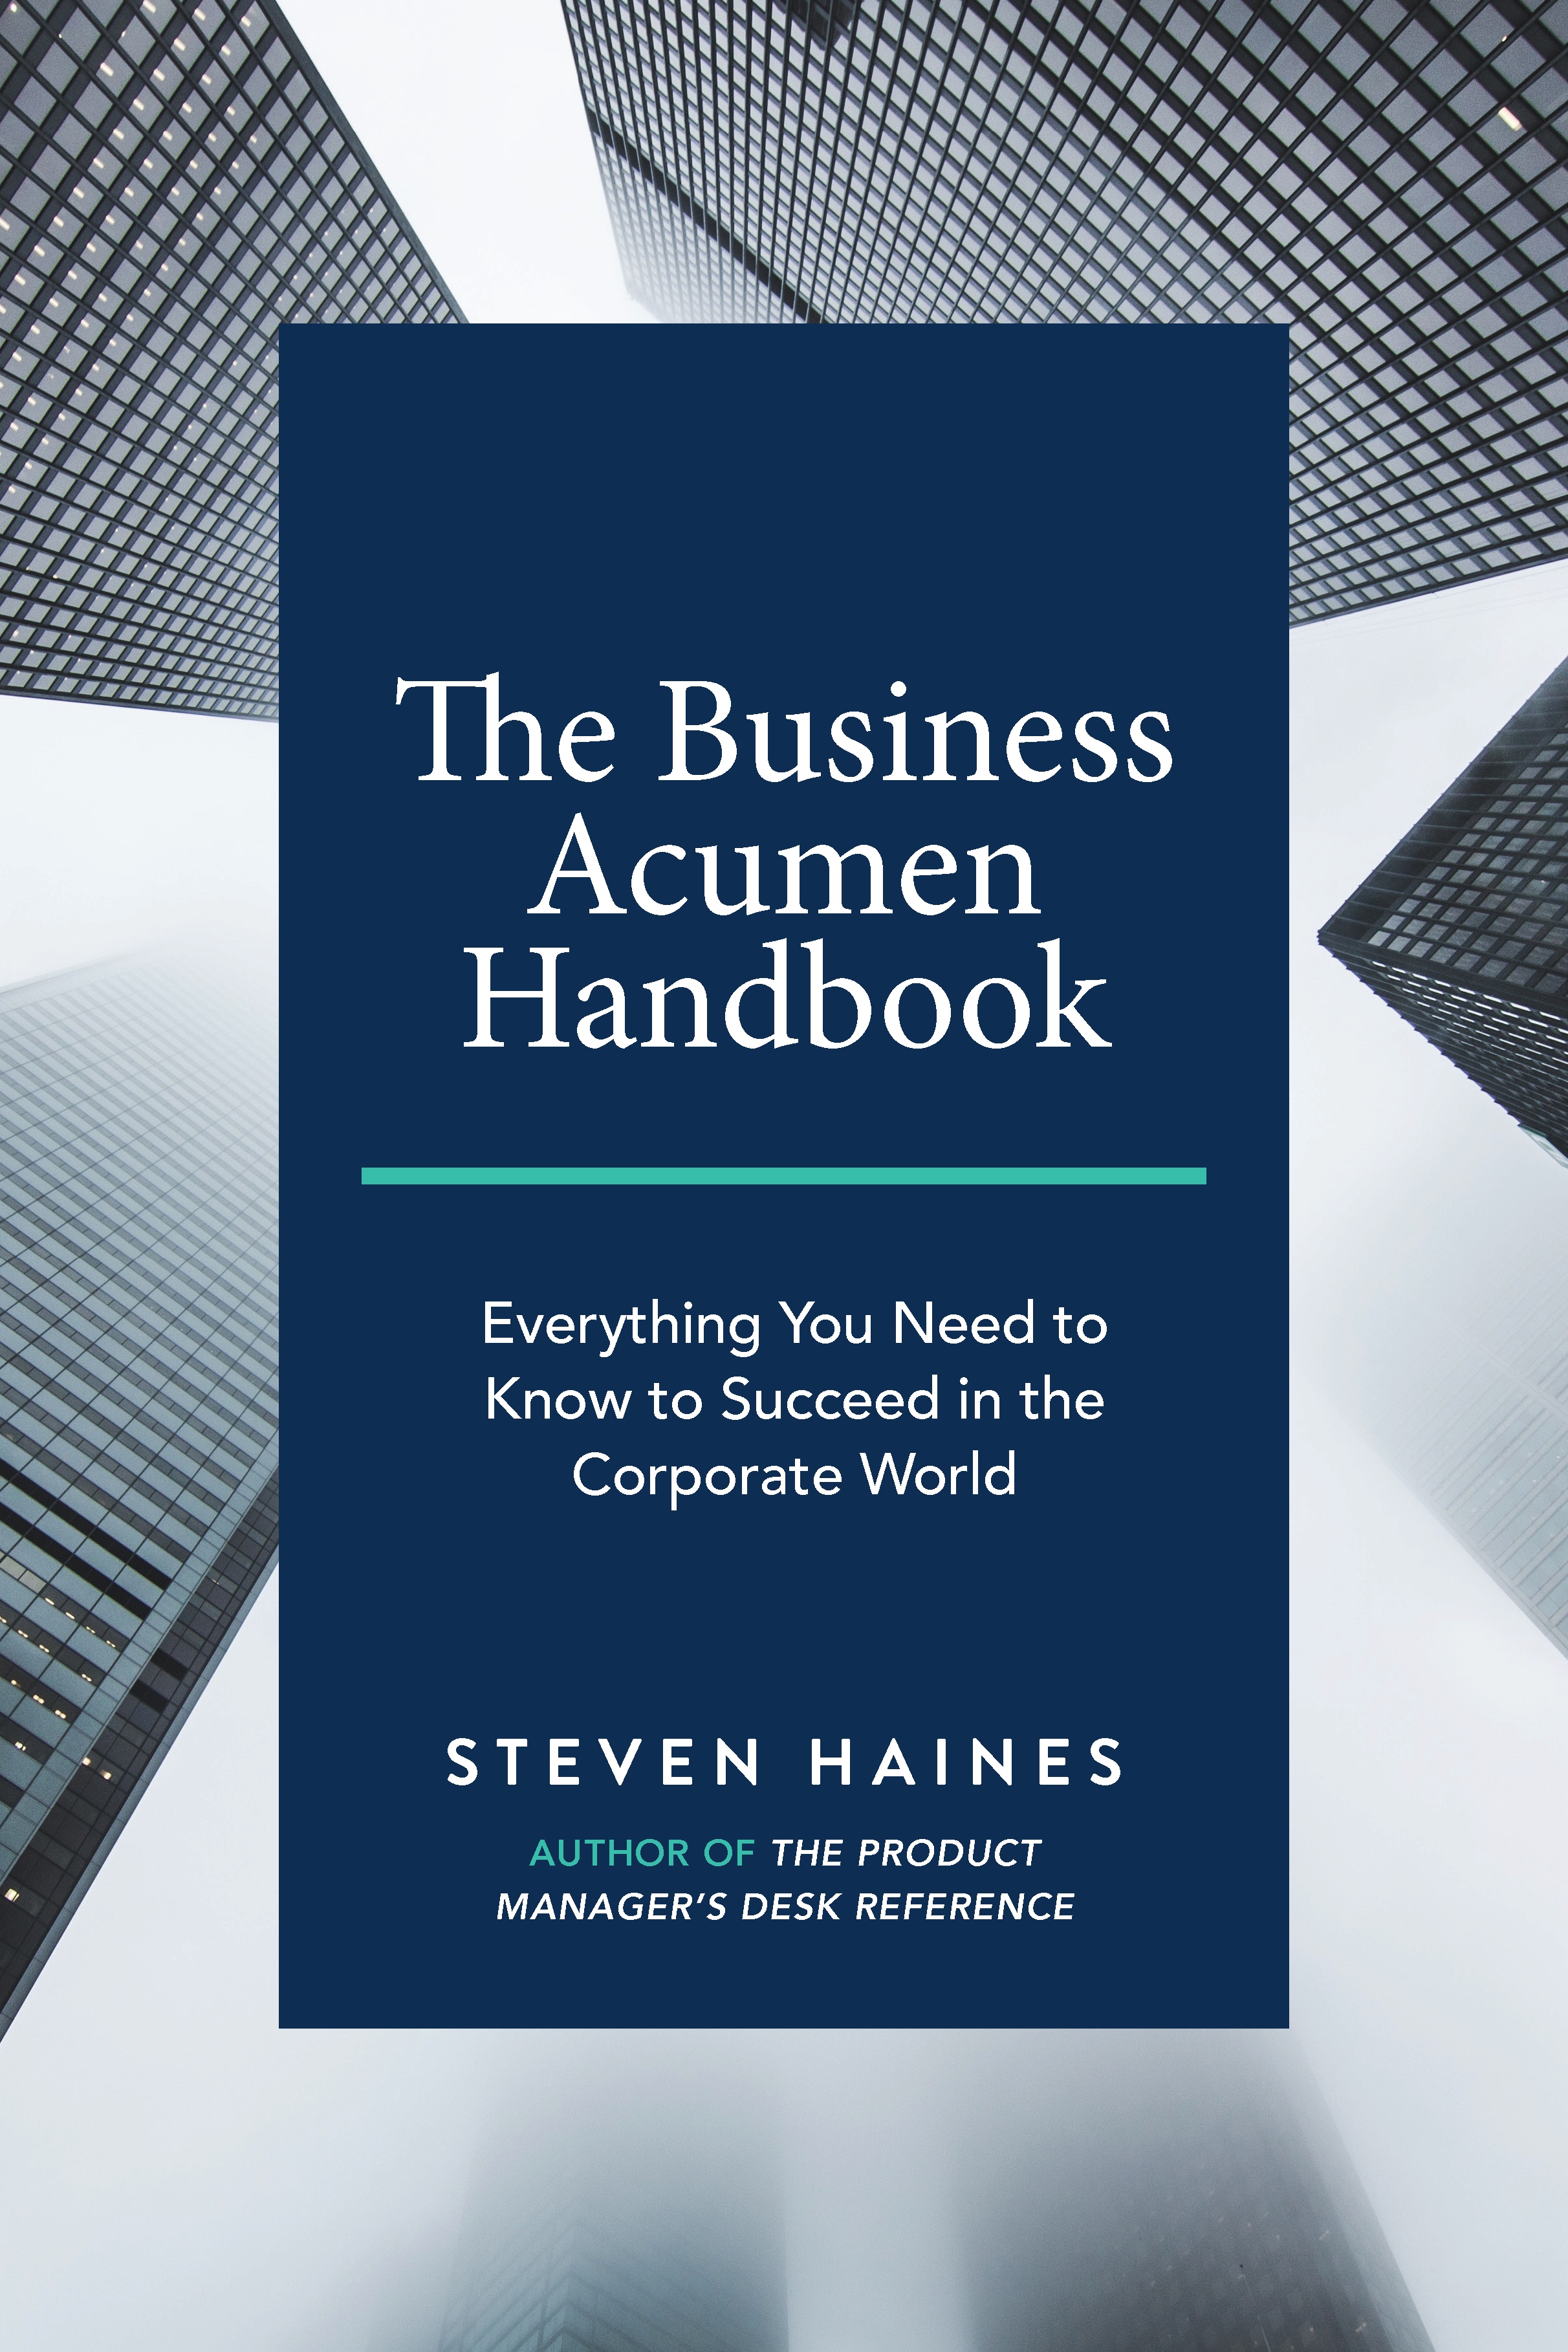 The Business Acumen Handbook: Everything You Need to Know to Succeed in the Corporate World by Steven Haines